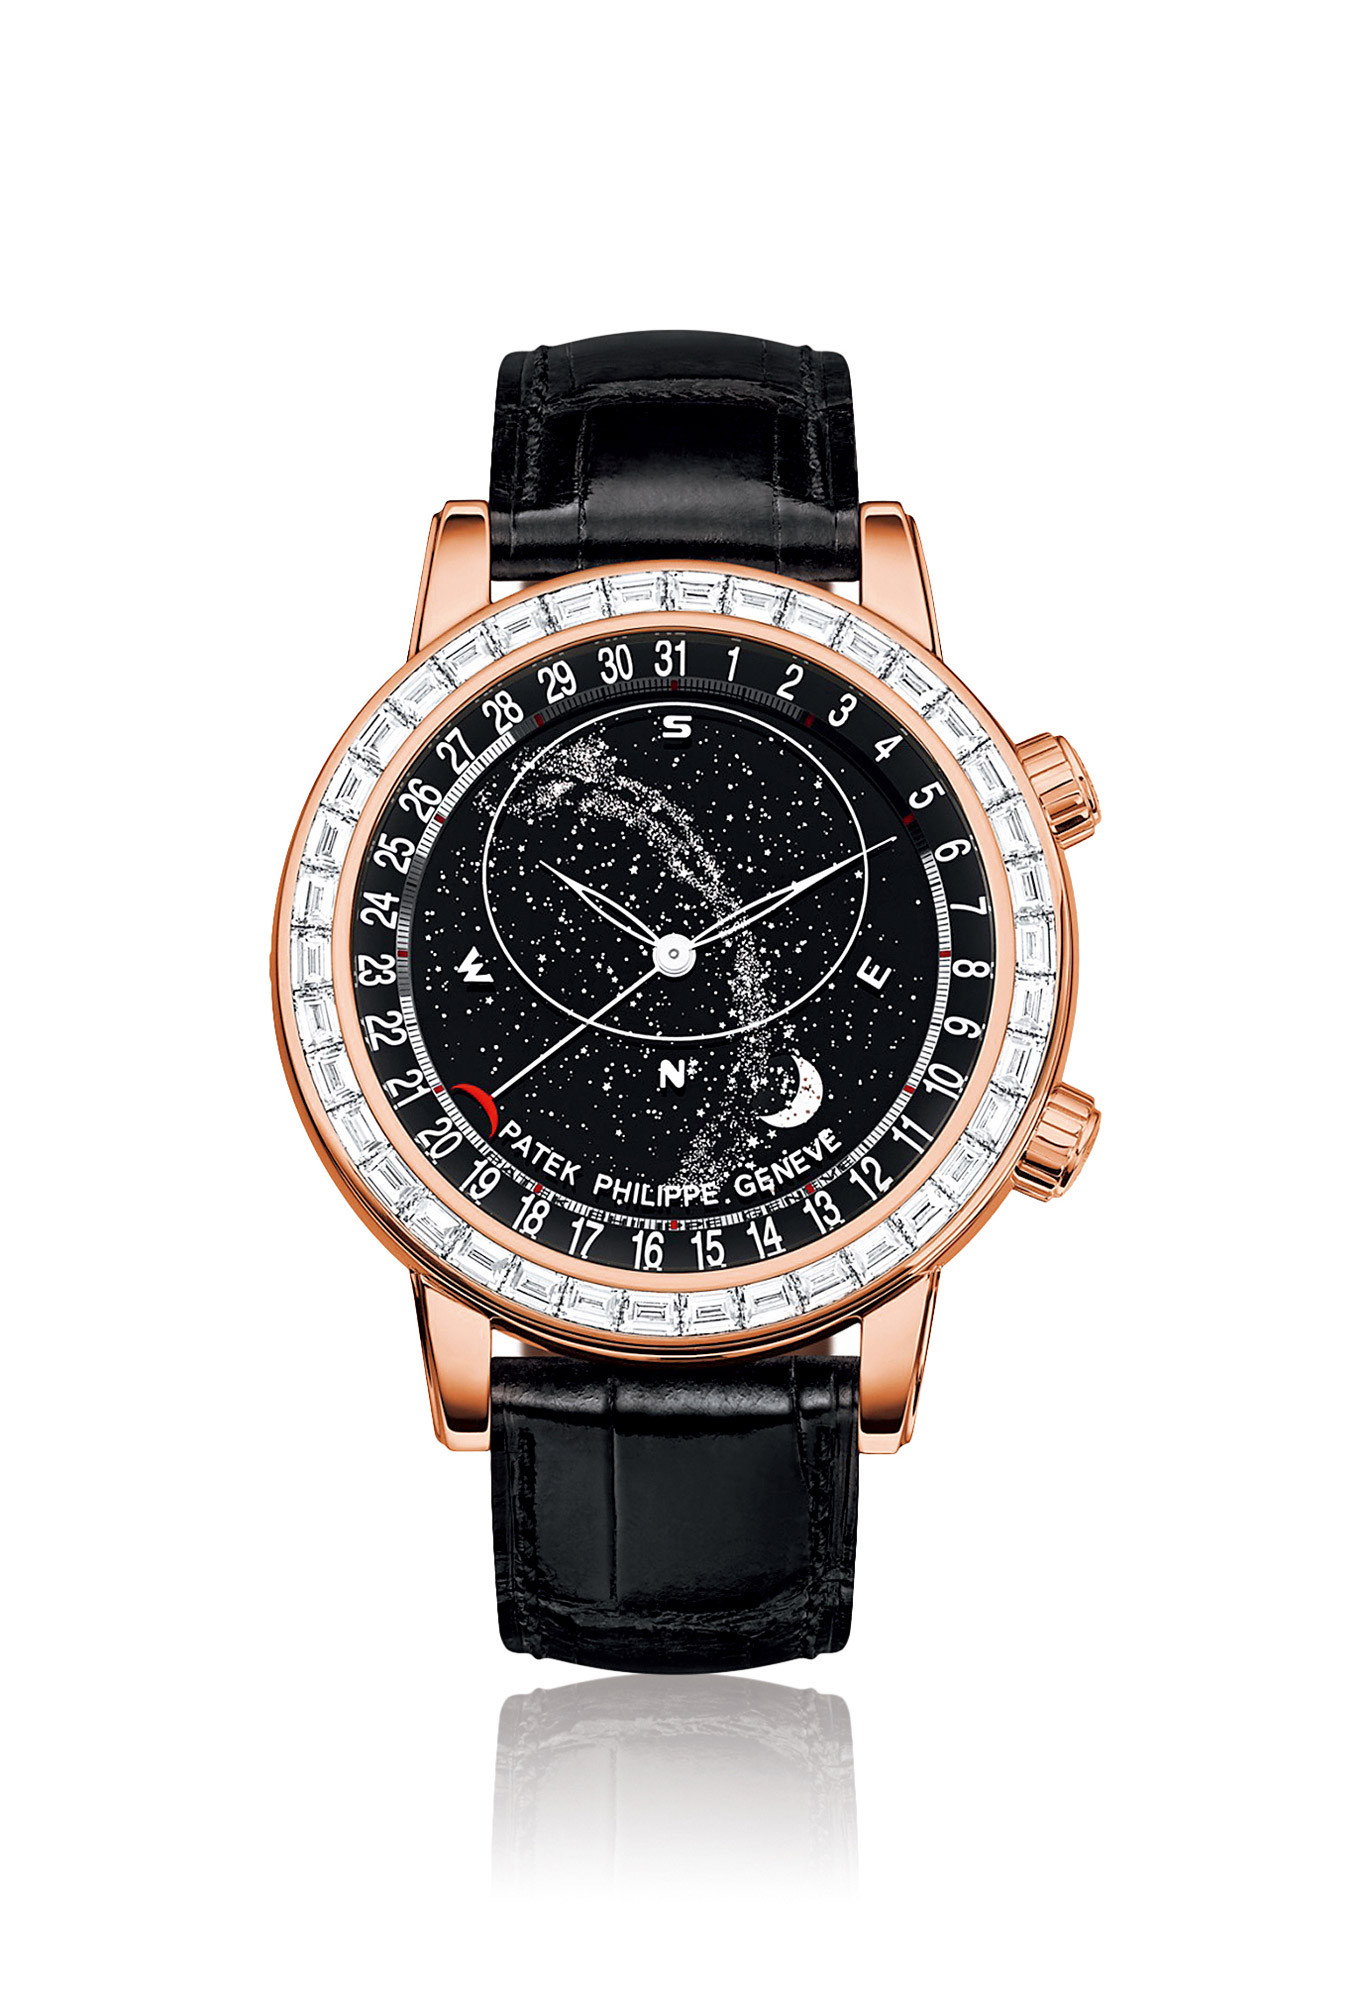 PATEK PHILIPPE A MAGNIFICENT AND RARE ROSE GOLD AND DIAMOND-SET ASTRONOMICAL AUTOMATIC WRISTWATCH，WITH DATE，SKY CHART，PHASES AND POSITION OF THE MOON AND TIME OF MERIDIAN PASSAGE OF SIRIUS AND THE MOONS，ACCOMPANIED WITH CERTIFICATE OF ORIGIN AND PRESENTAT